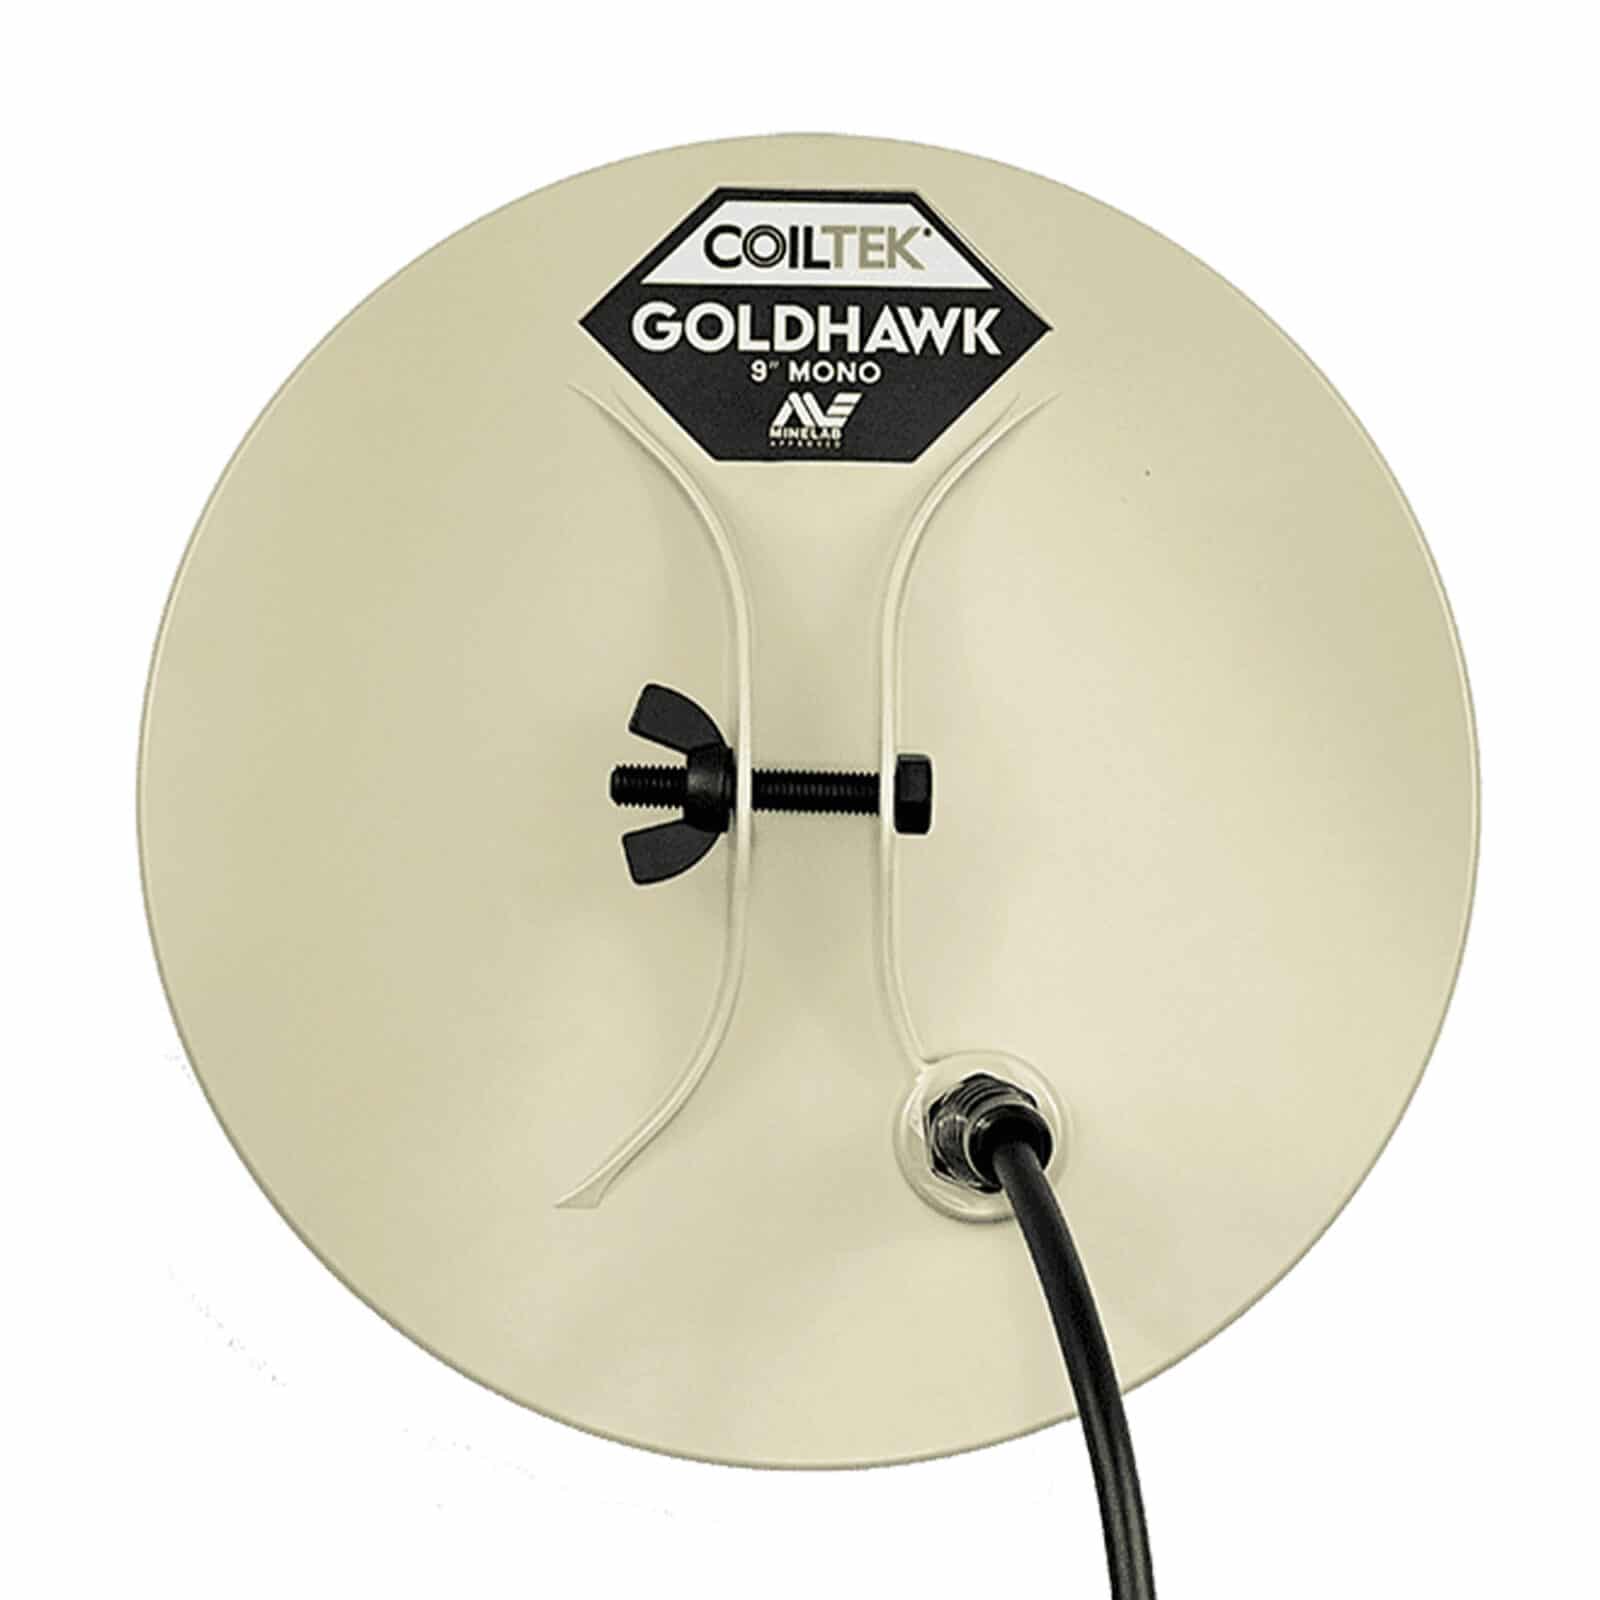 Coiltek Goldhawk 9″ MONO Search Coil for Minelab GPX 6000 Metal Detector